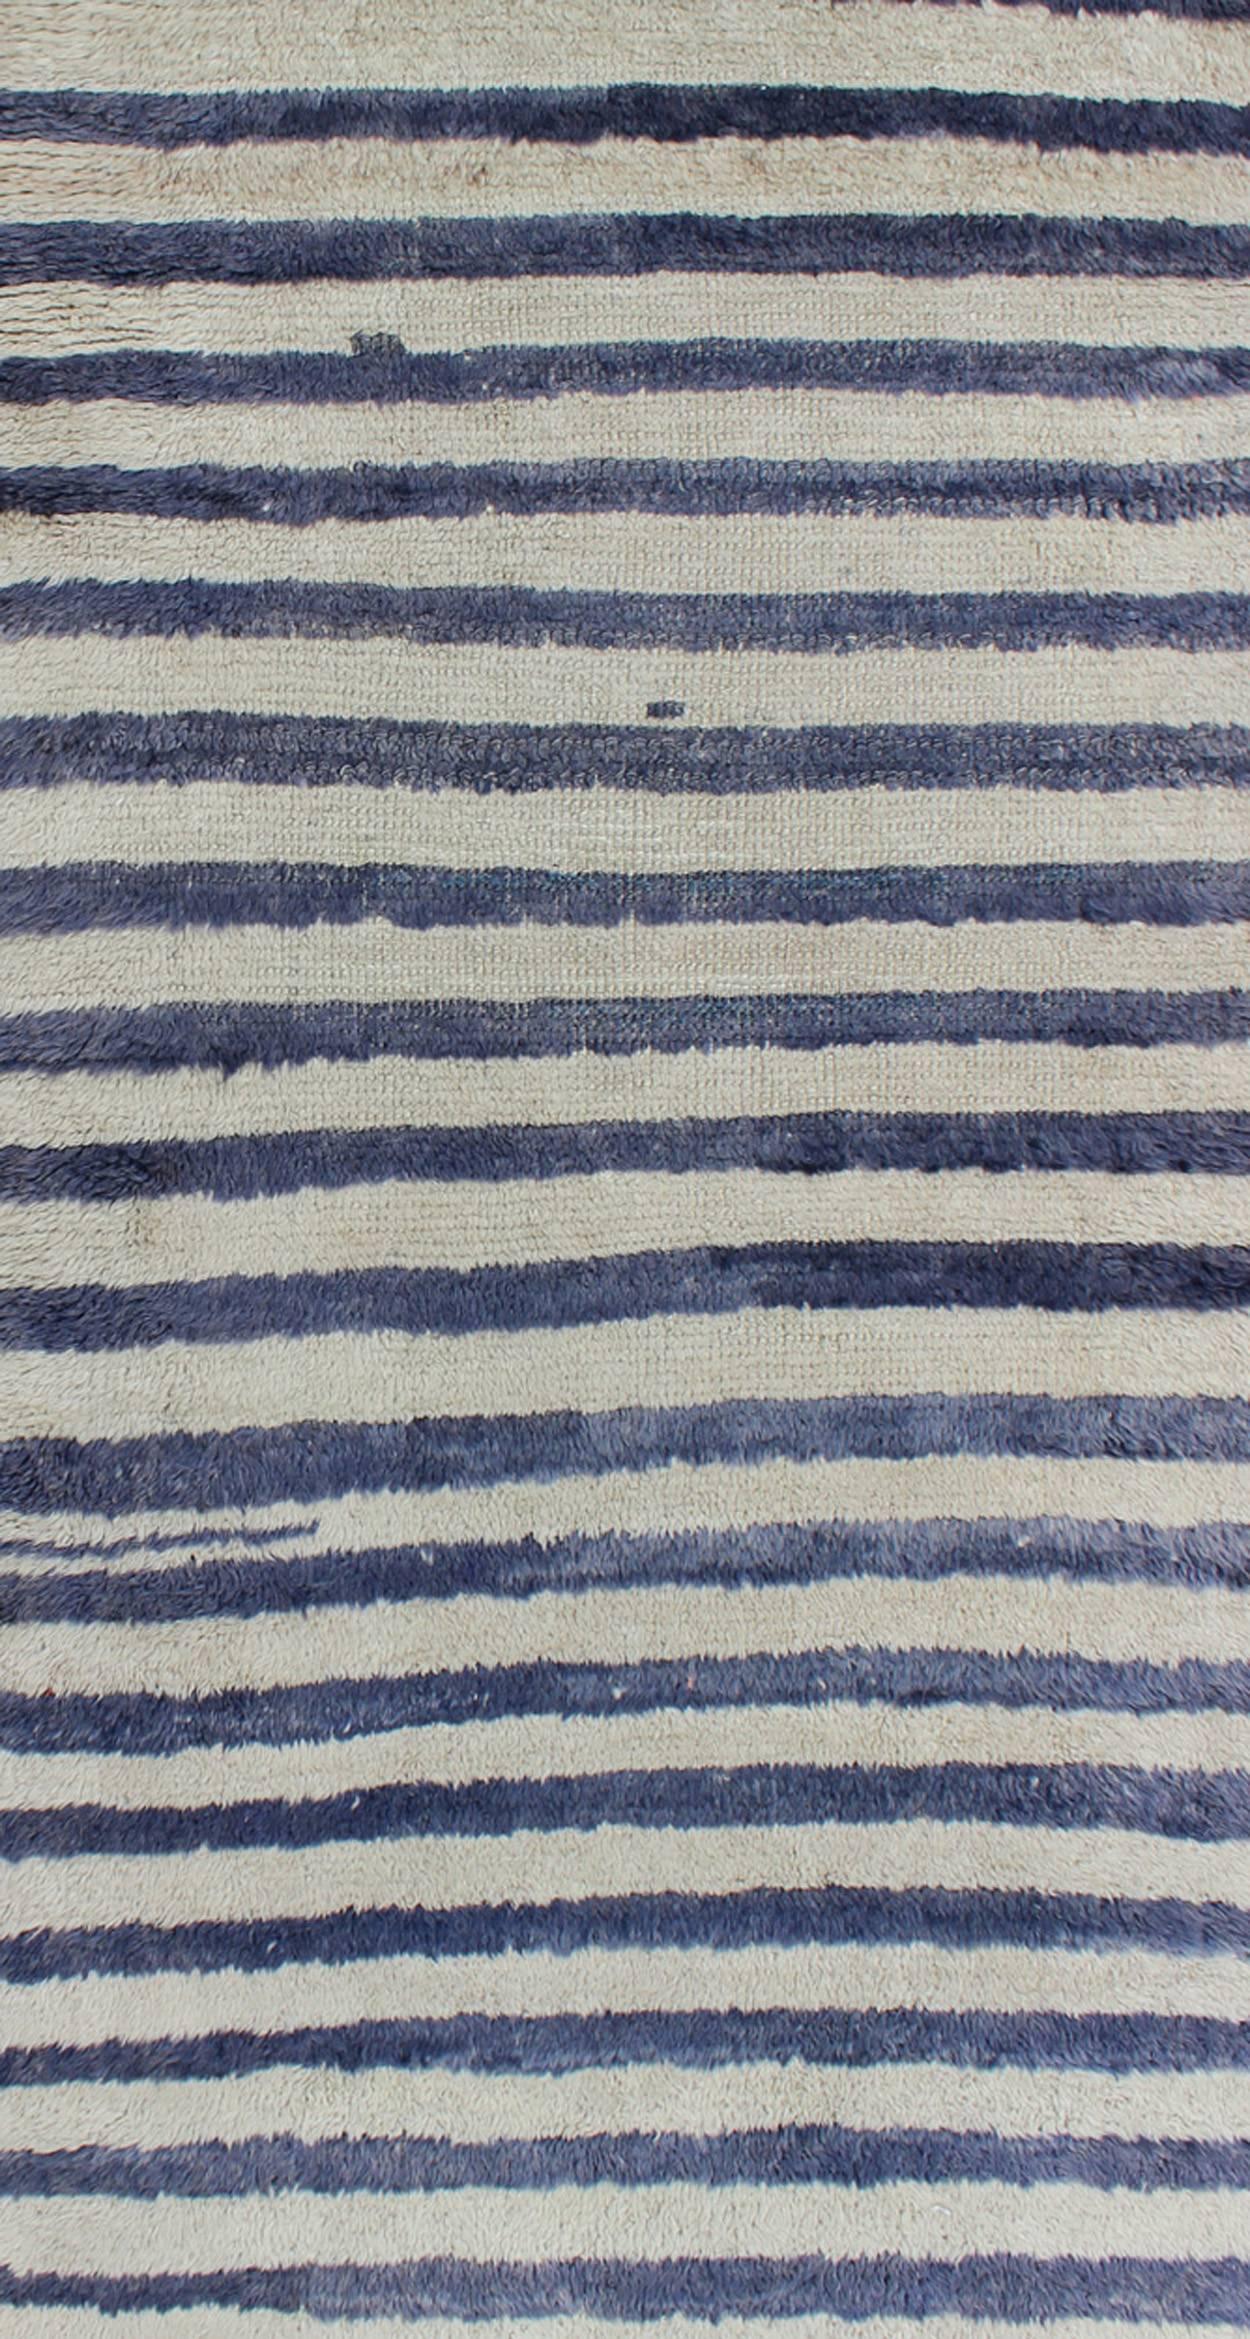 Hand-Knotted Turkish Angora Tulu Carpet with Cream and Navy Blue Stripe Pattern